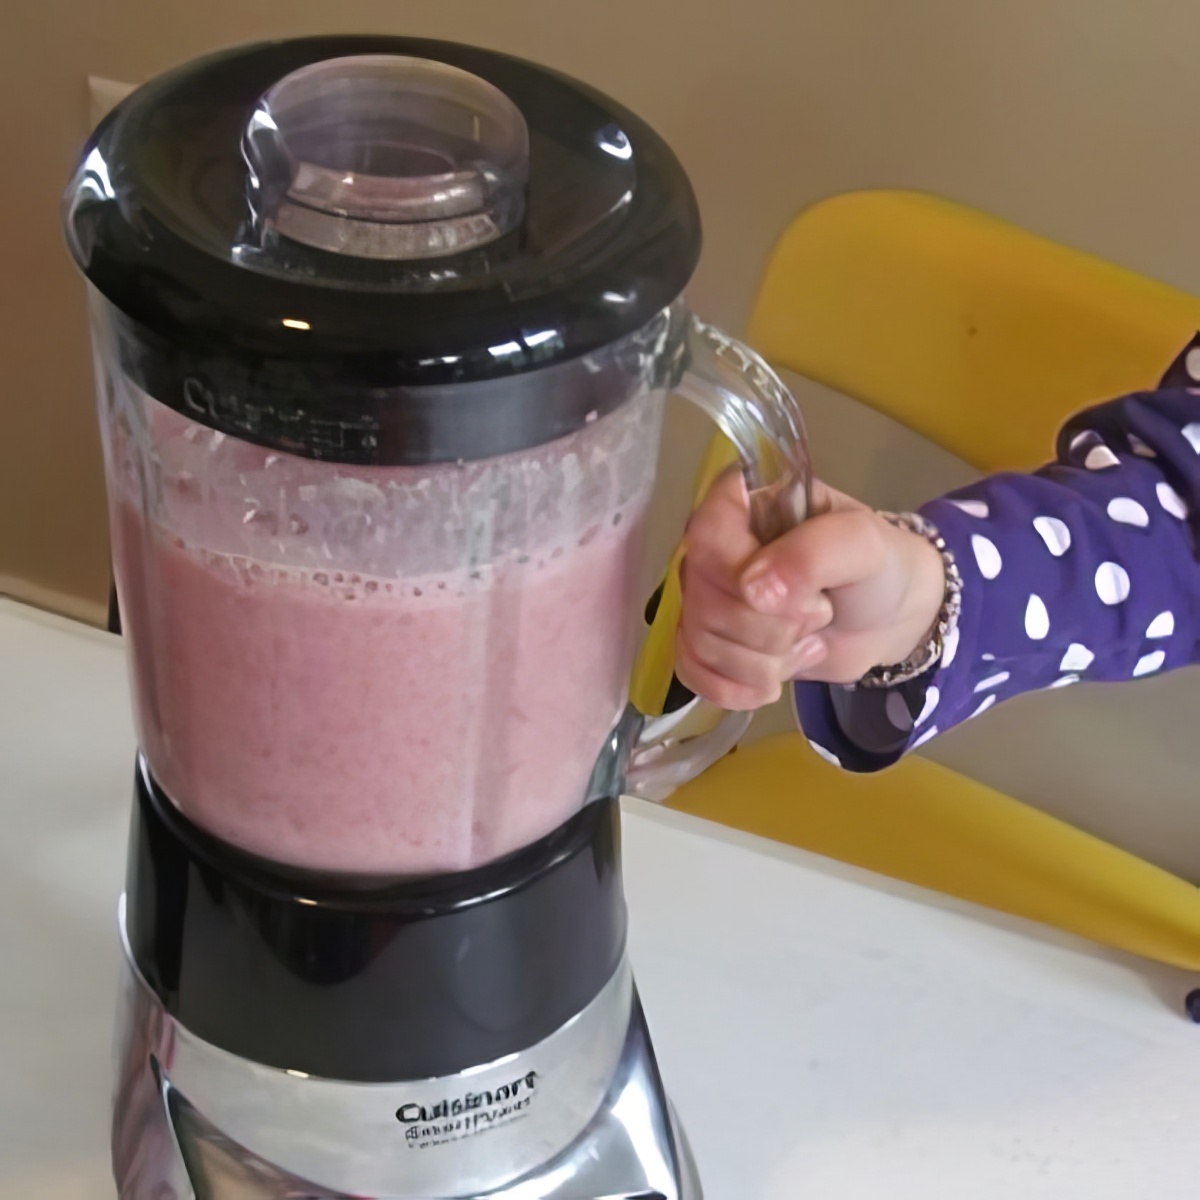 strawberry and banana smoothie on a blender with kid's hand